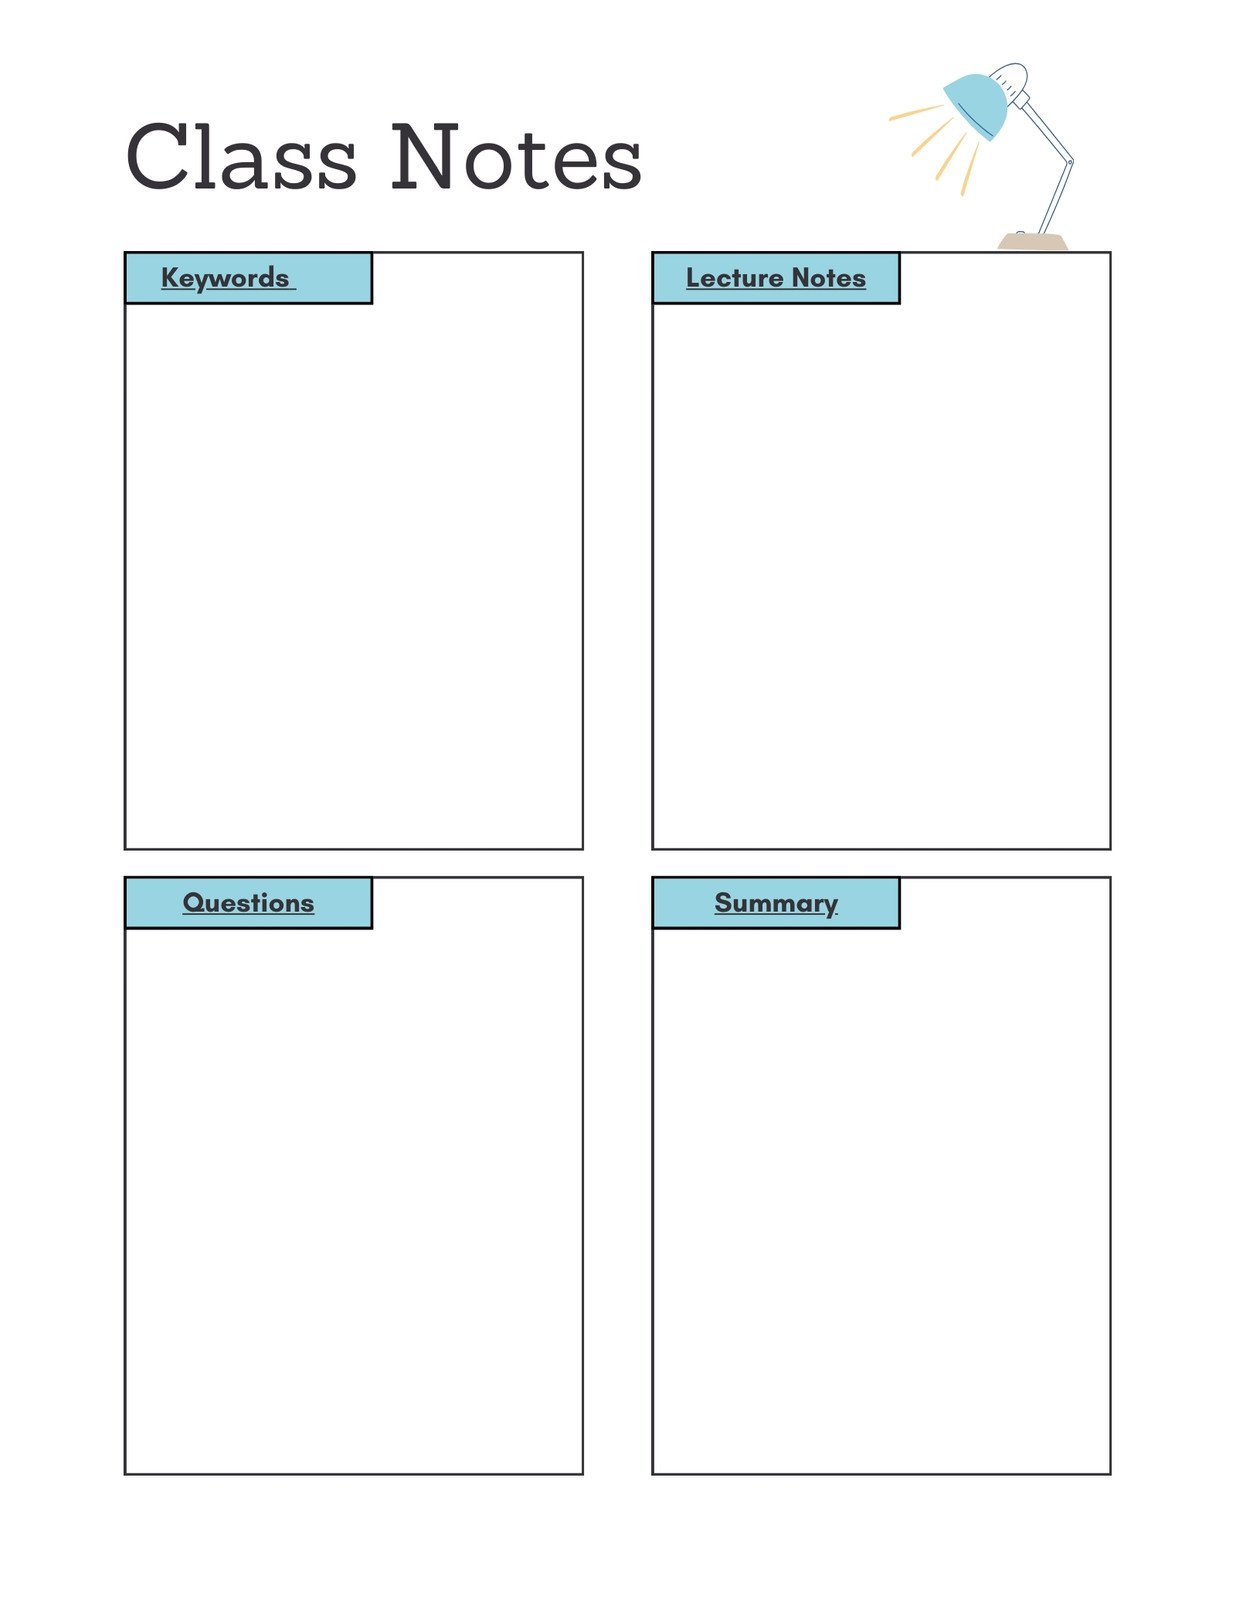 https://marketplace.canva.com/EAFxa4mCgEE/5/0/1236w/canva-class-notes-worksheet-in-white-and-blue-simple-style-WyGyOuwx5bU.jpg